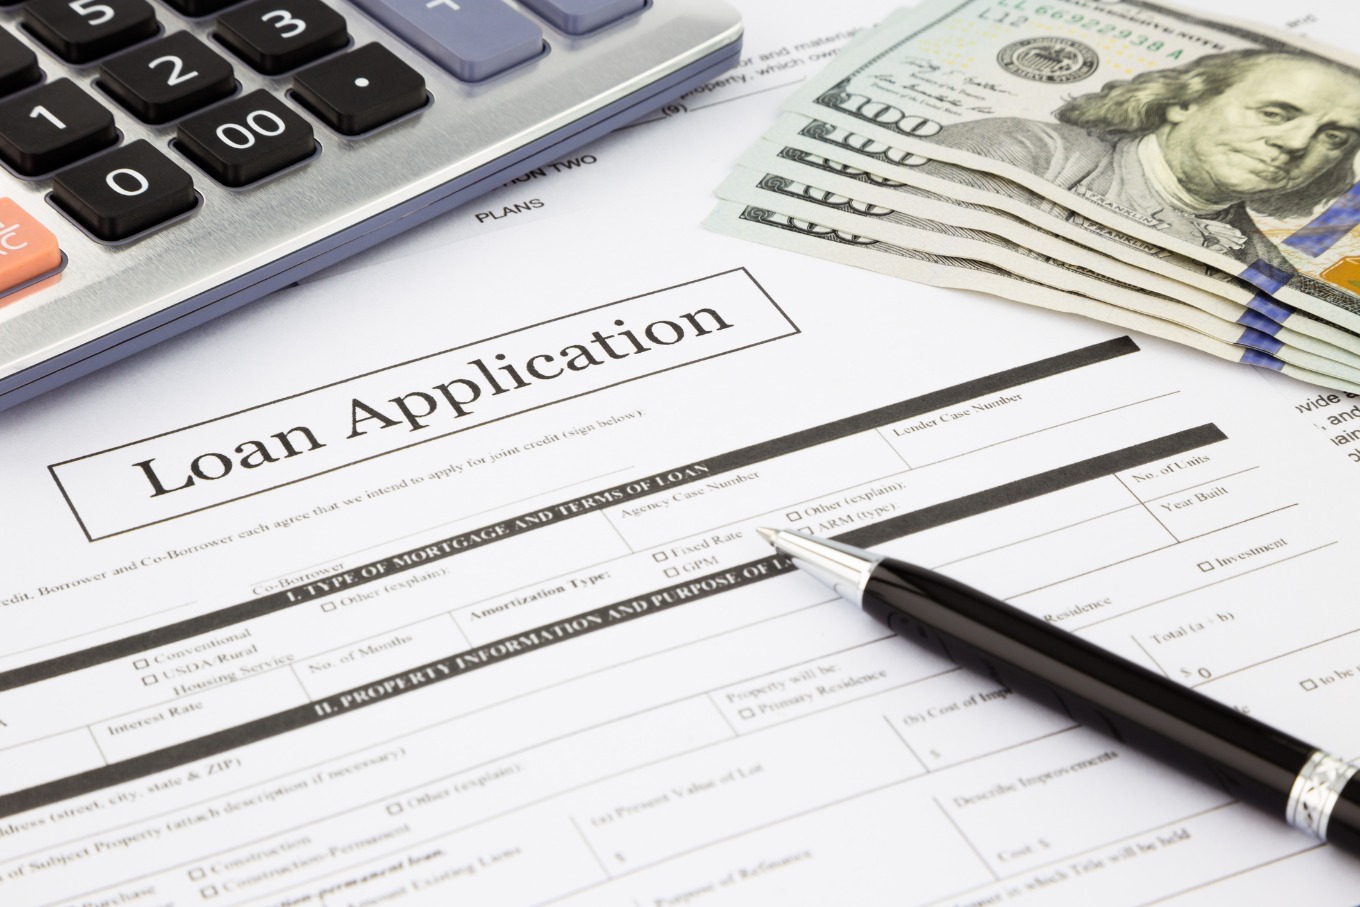 Home loan application with pen and calculator